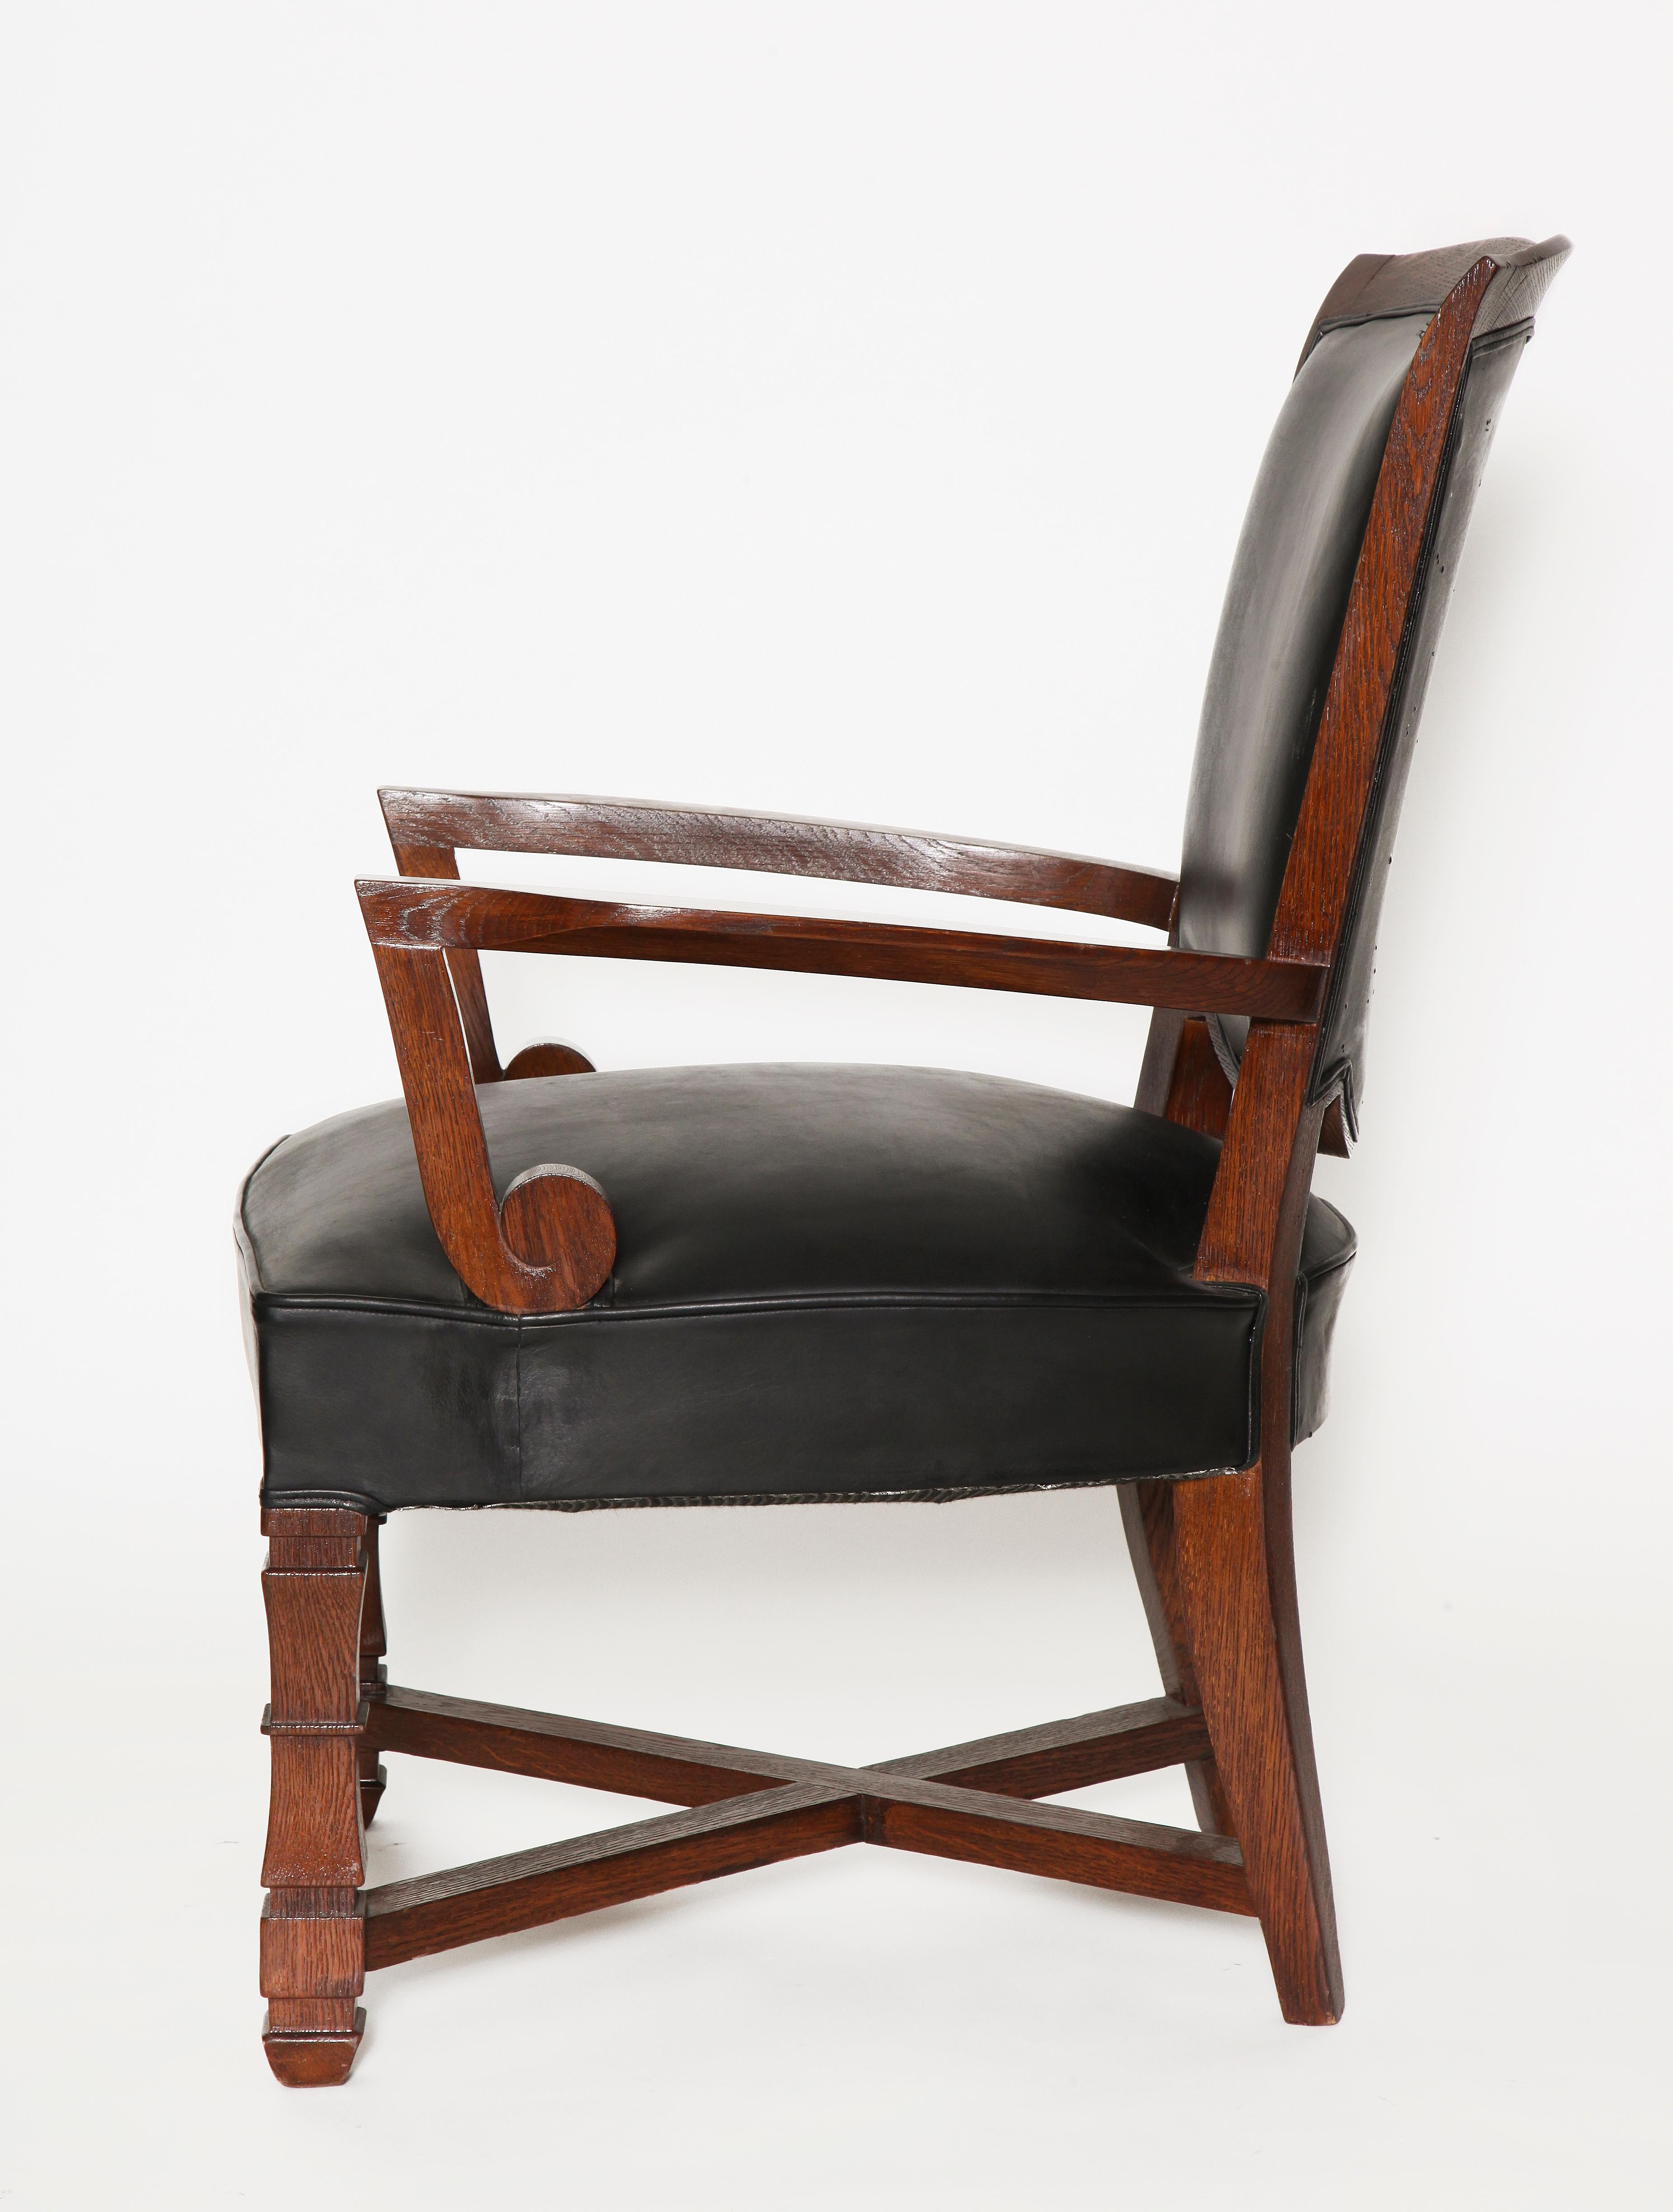 Jules Leleu, Mahogany and Leather Armchair, France, circa 1945 In Good Condition For Sale In New York, NY